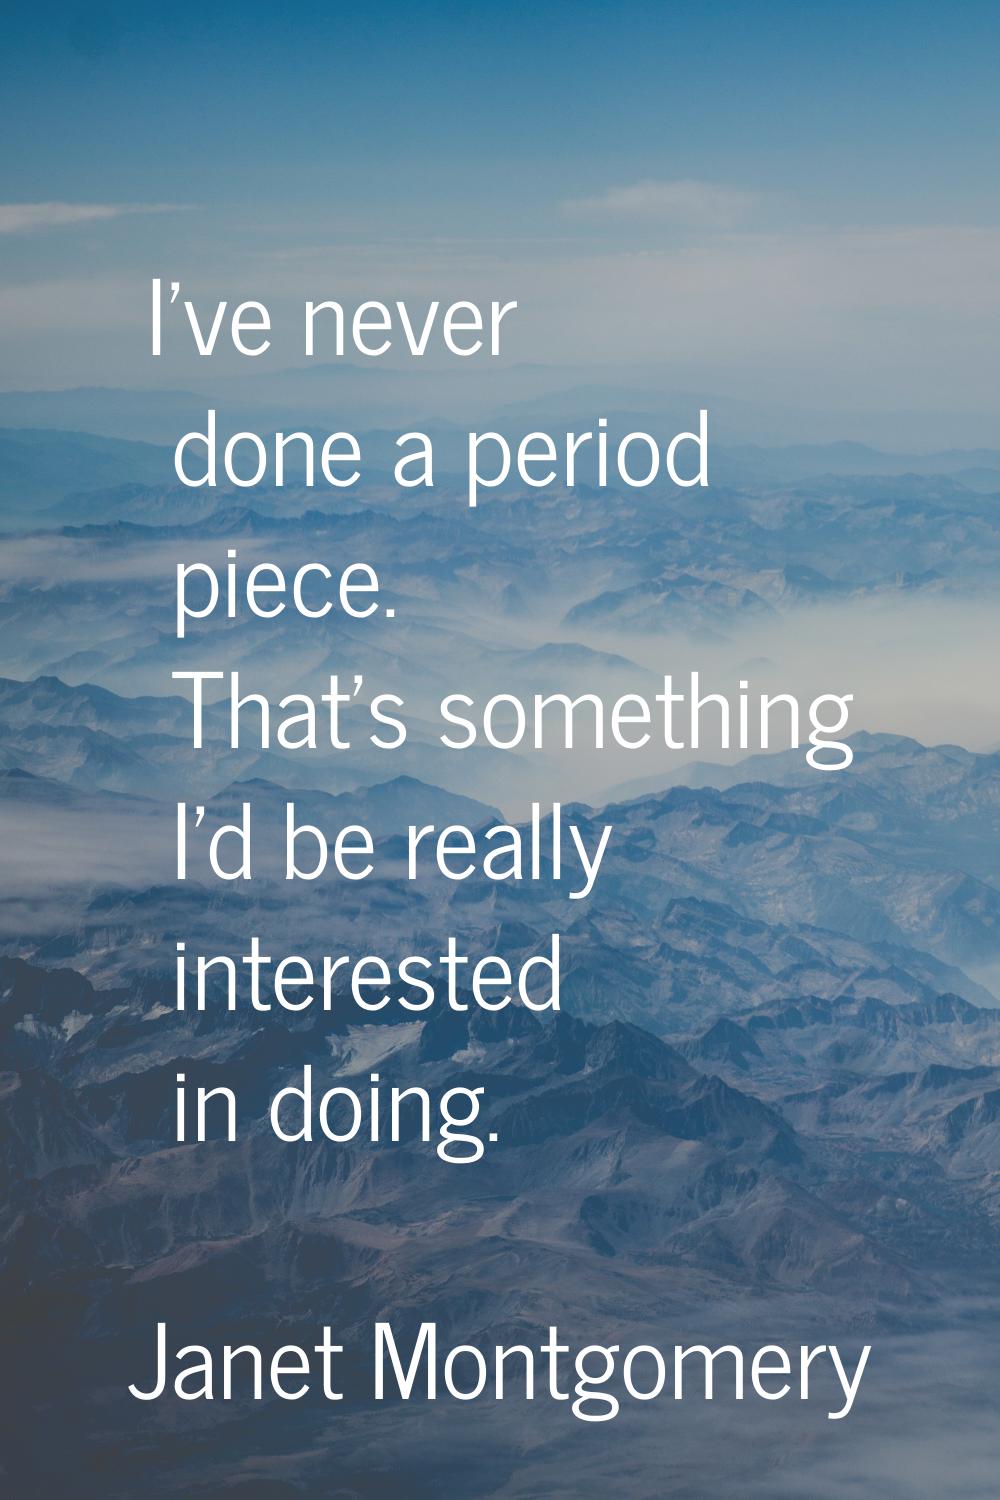 I've never done a period piece. That's something I'd be really interested in doing.